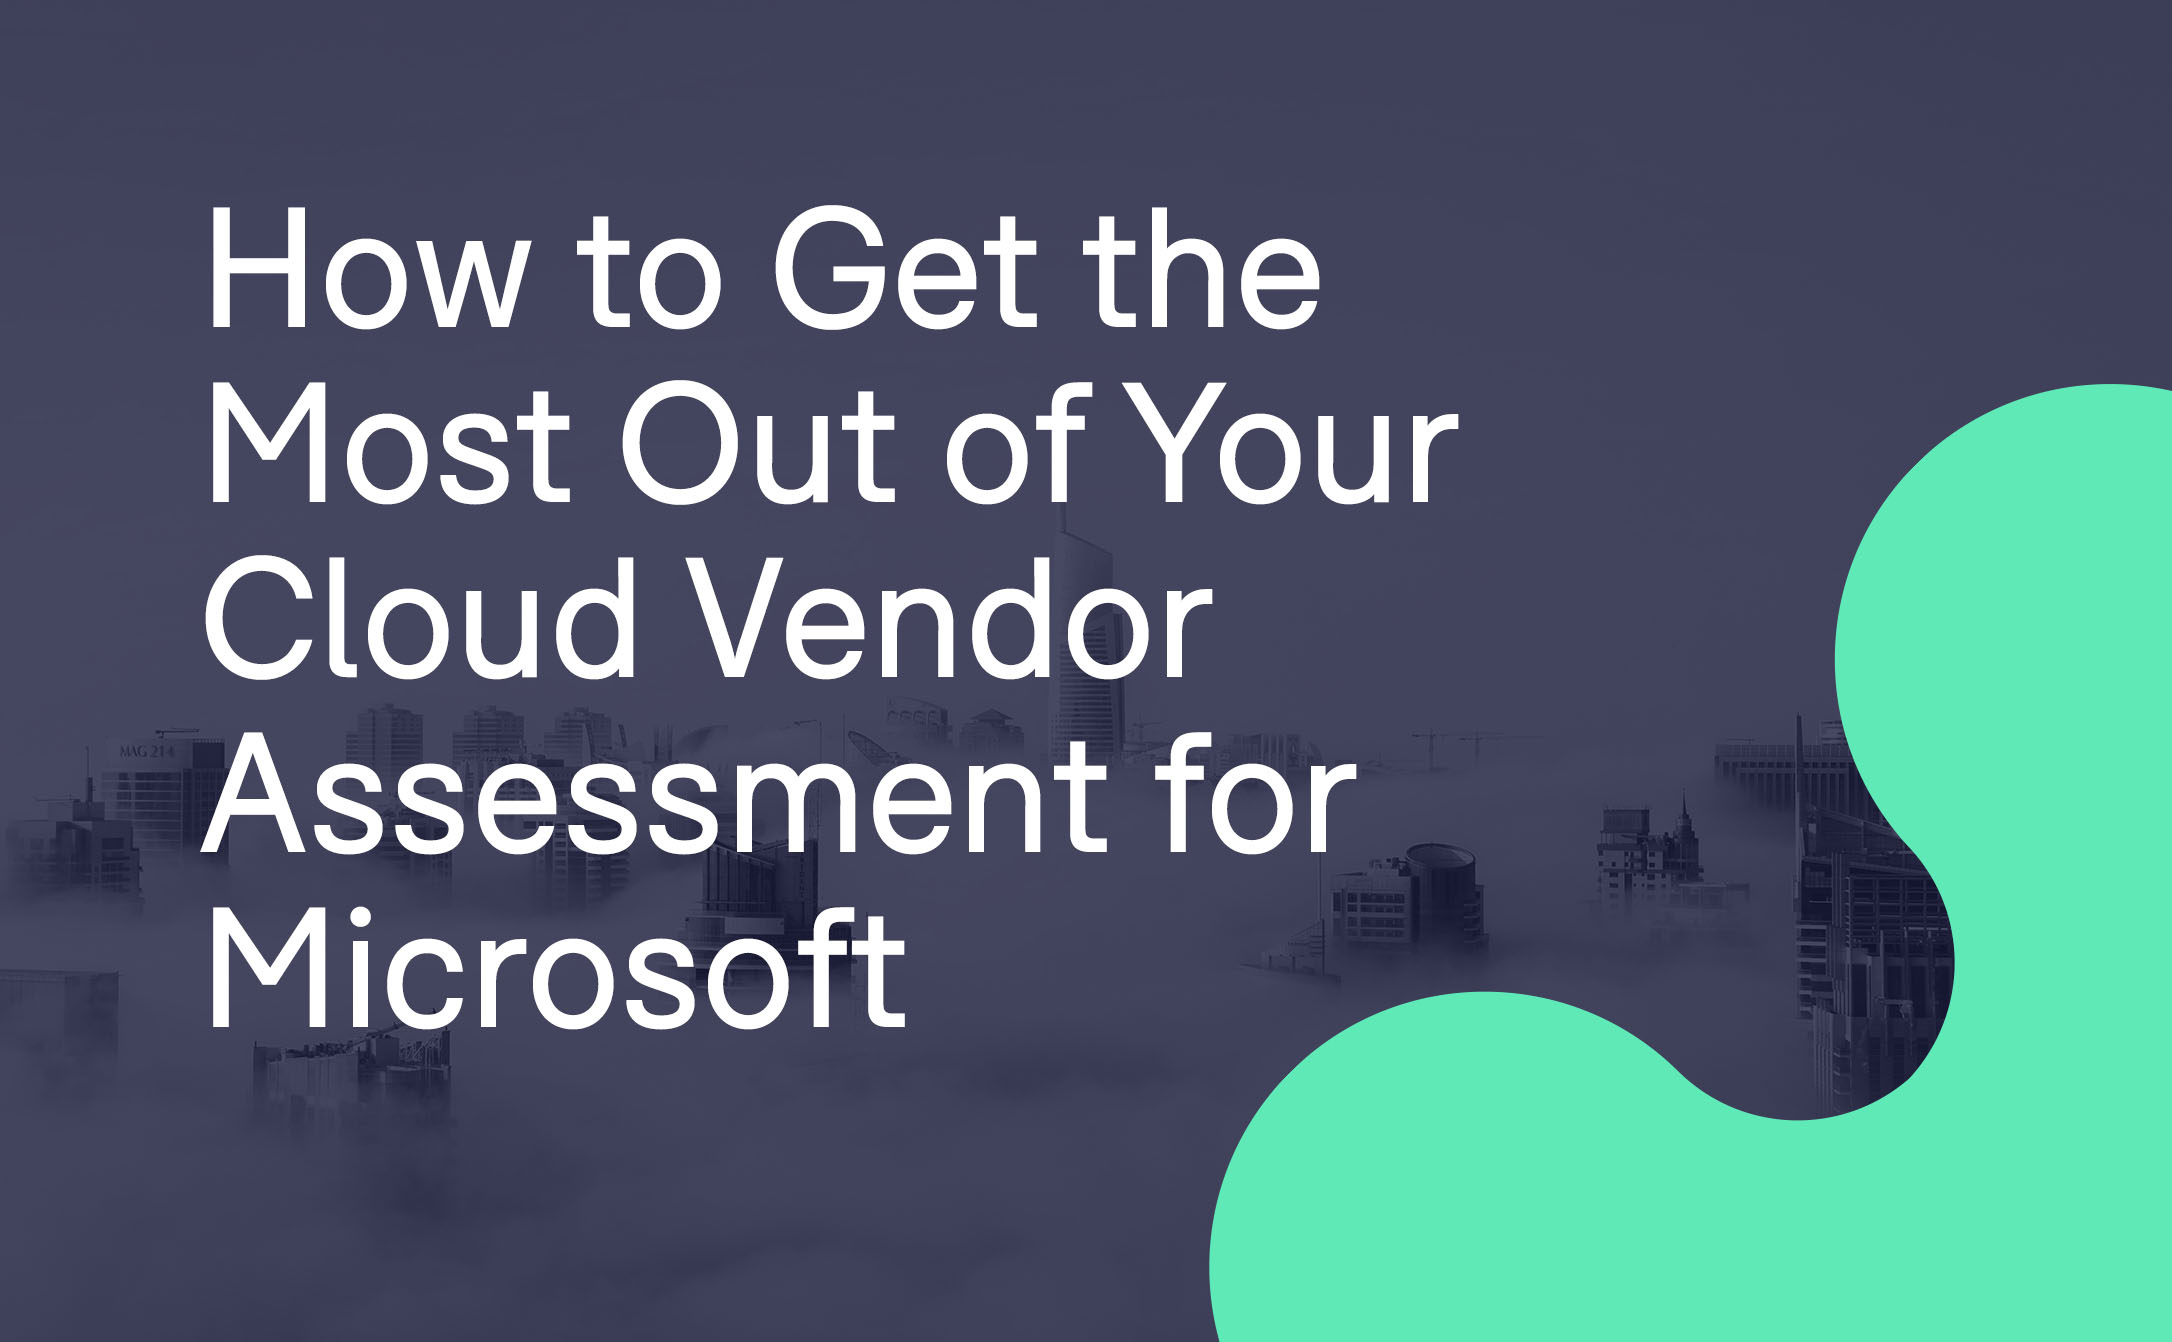 How to Get the Most Out of Your Cloud Vendor Assessment for Microsoft